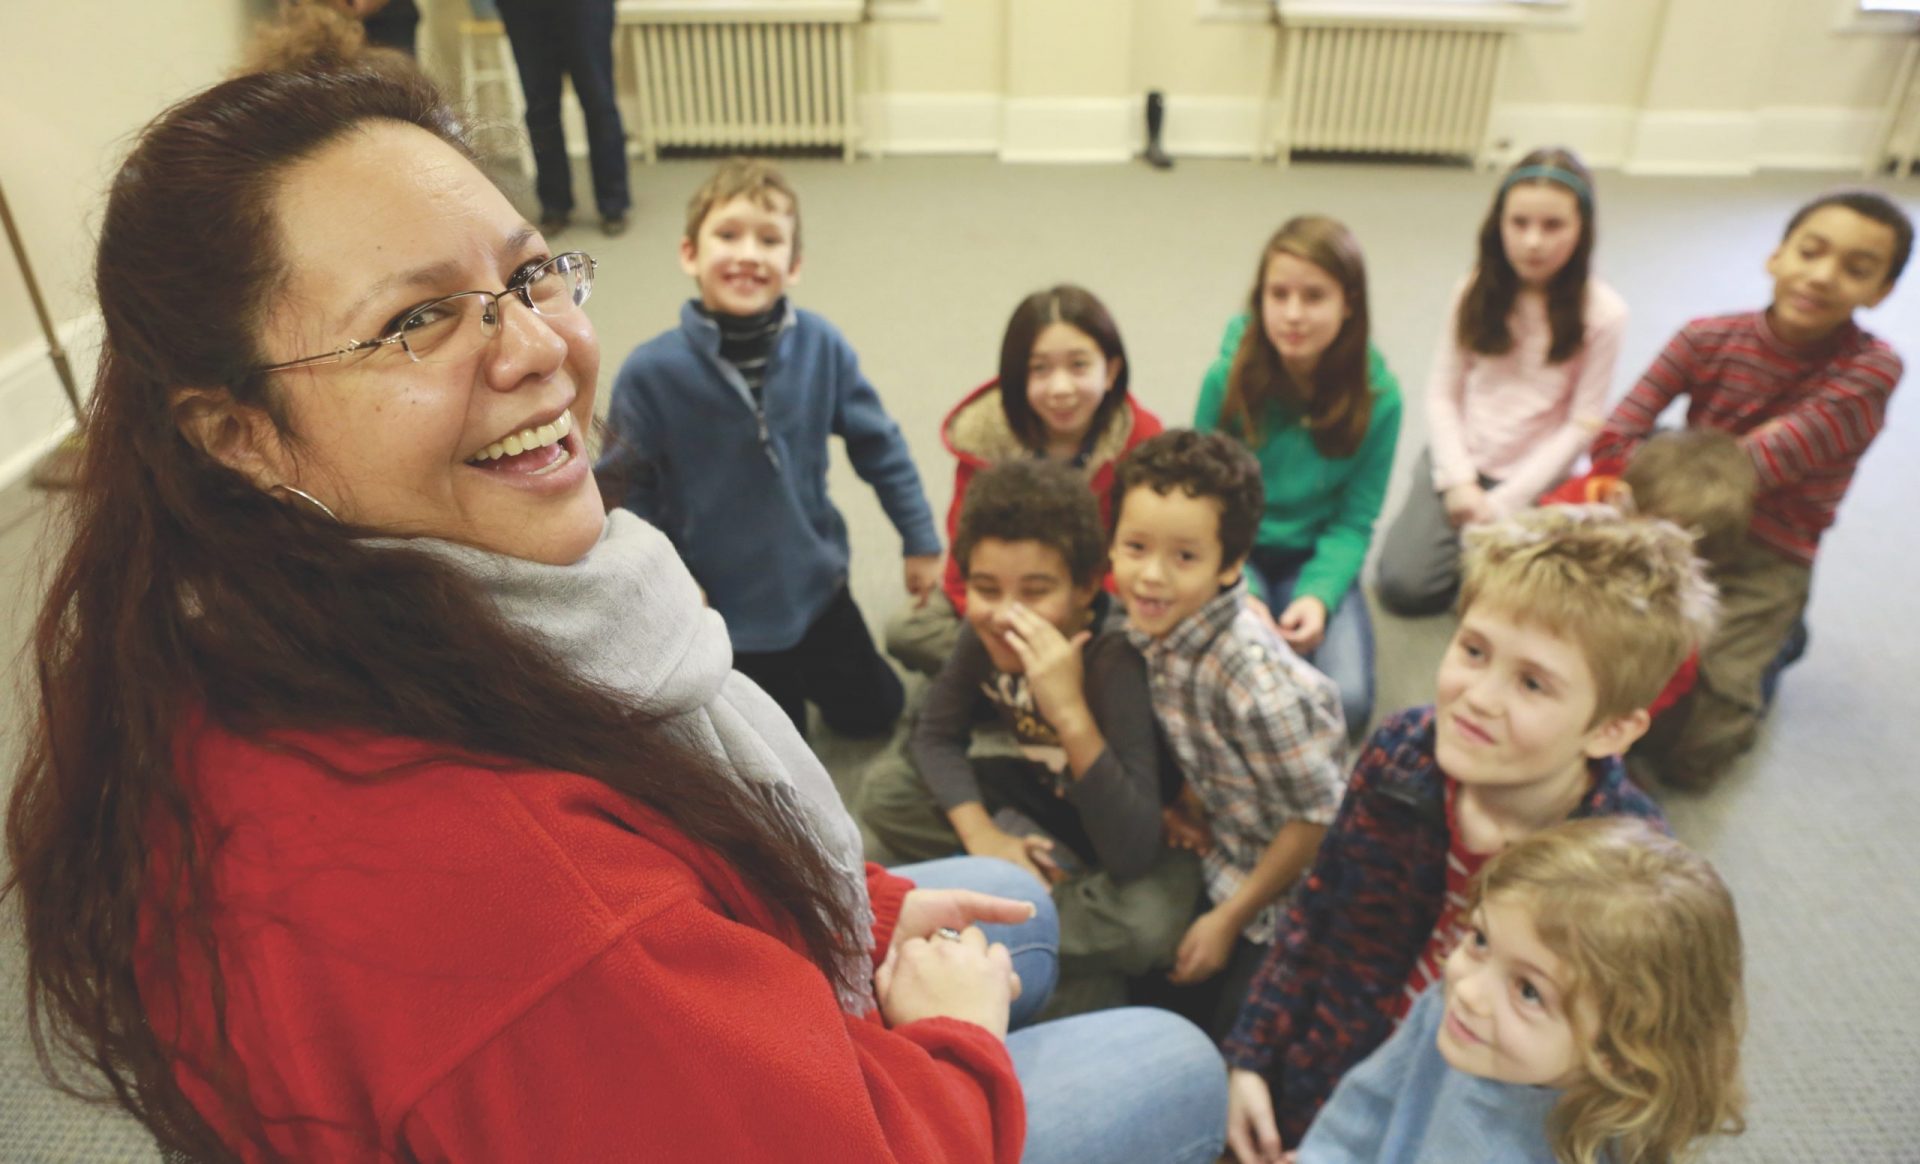 Woman in red jacket looks at camera, circle of children on floor smiling